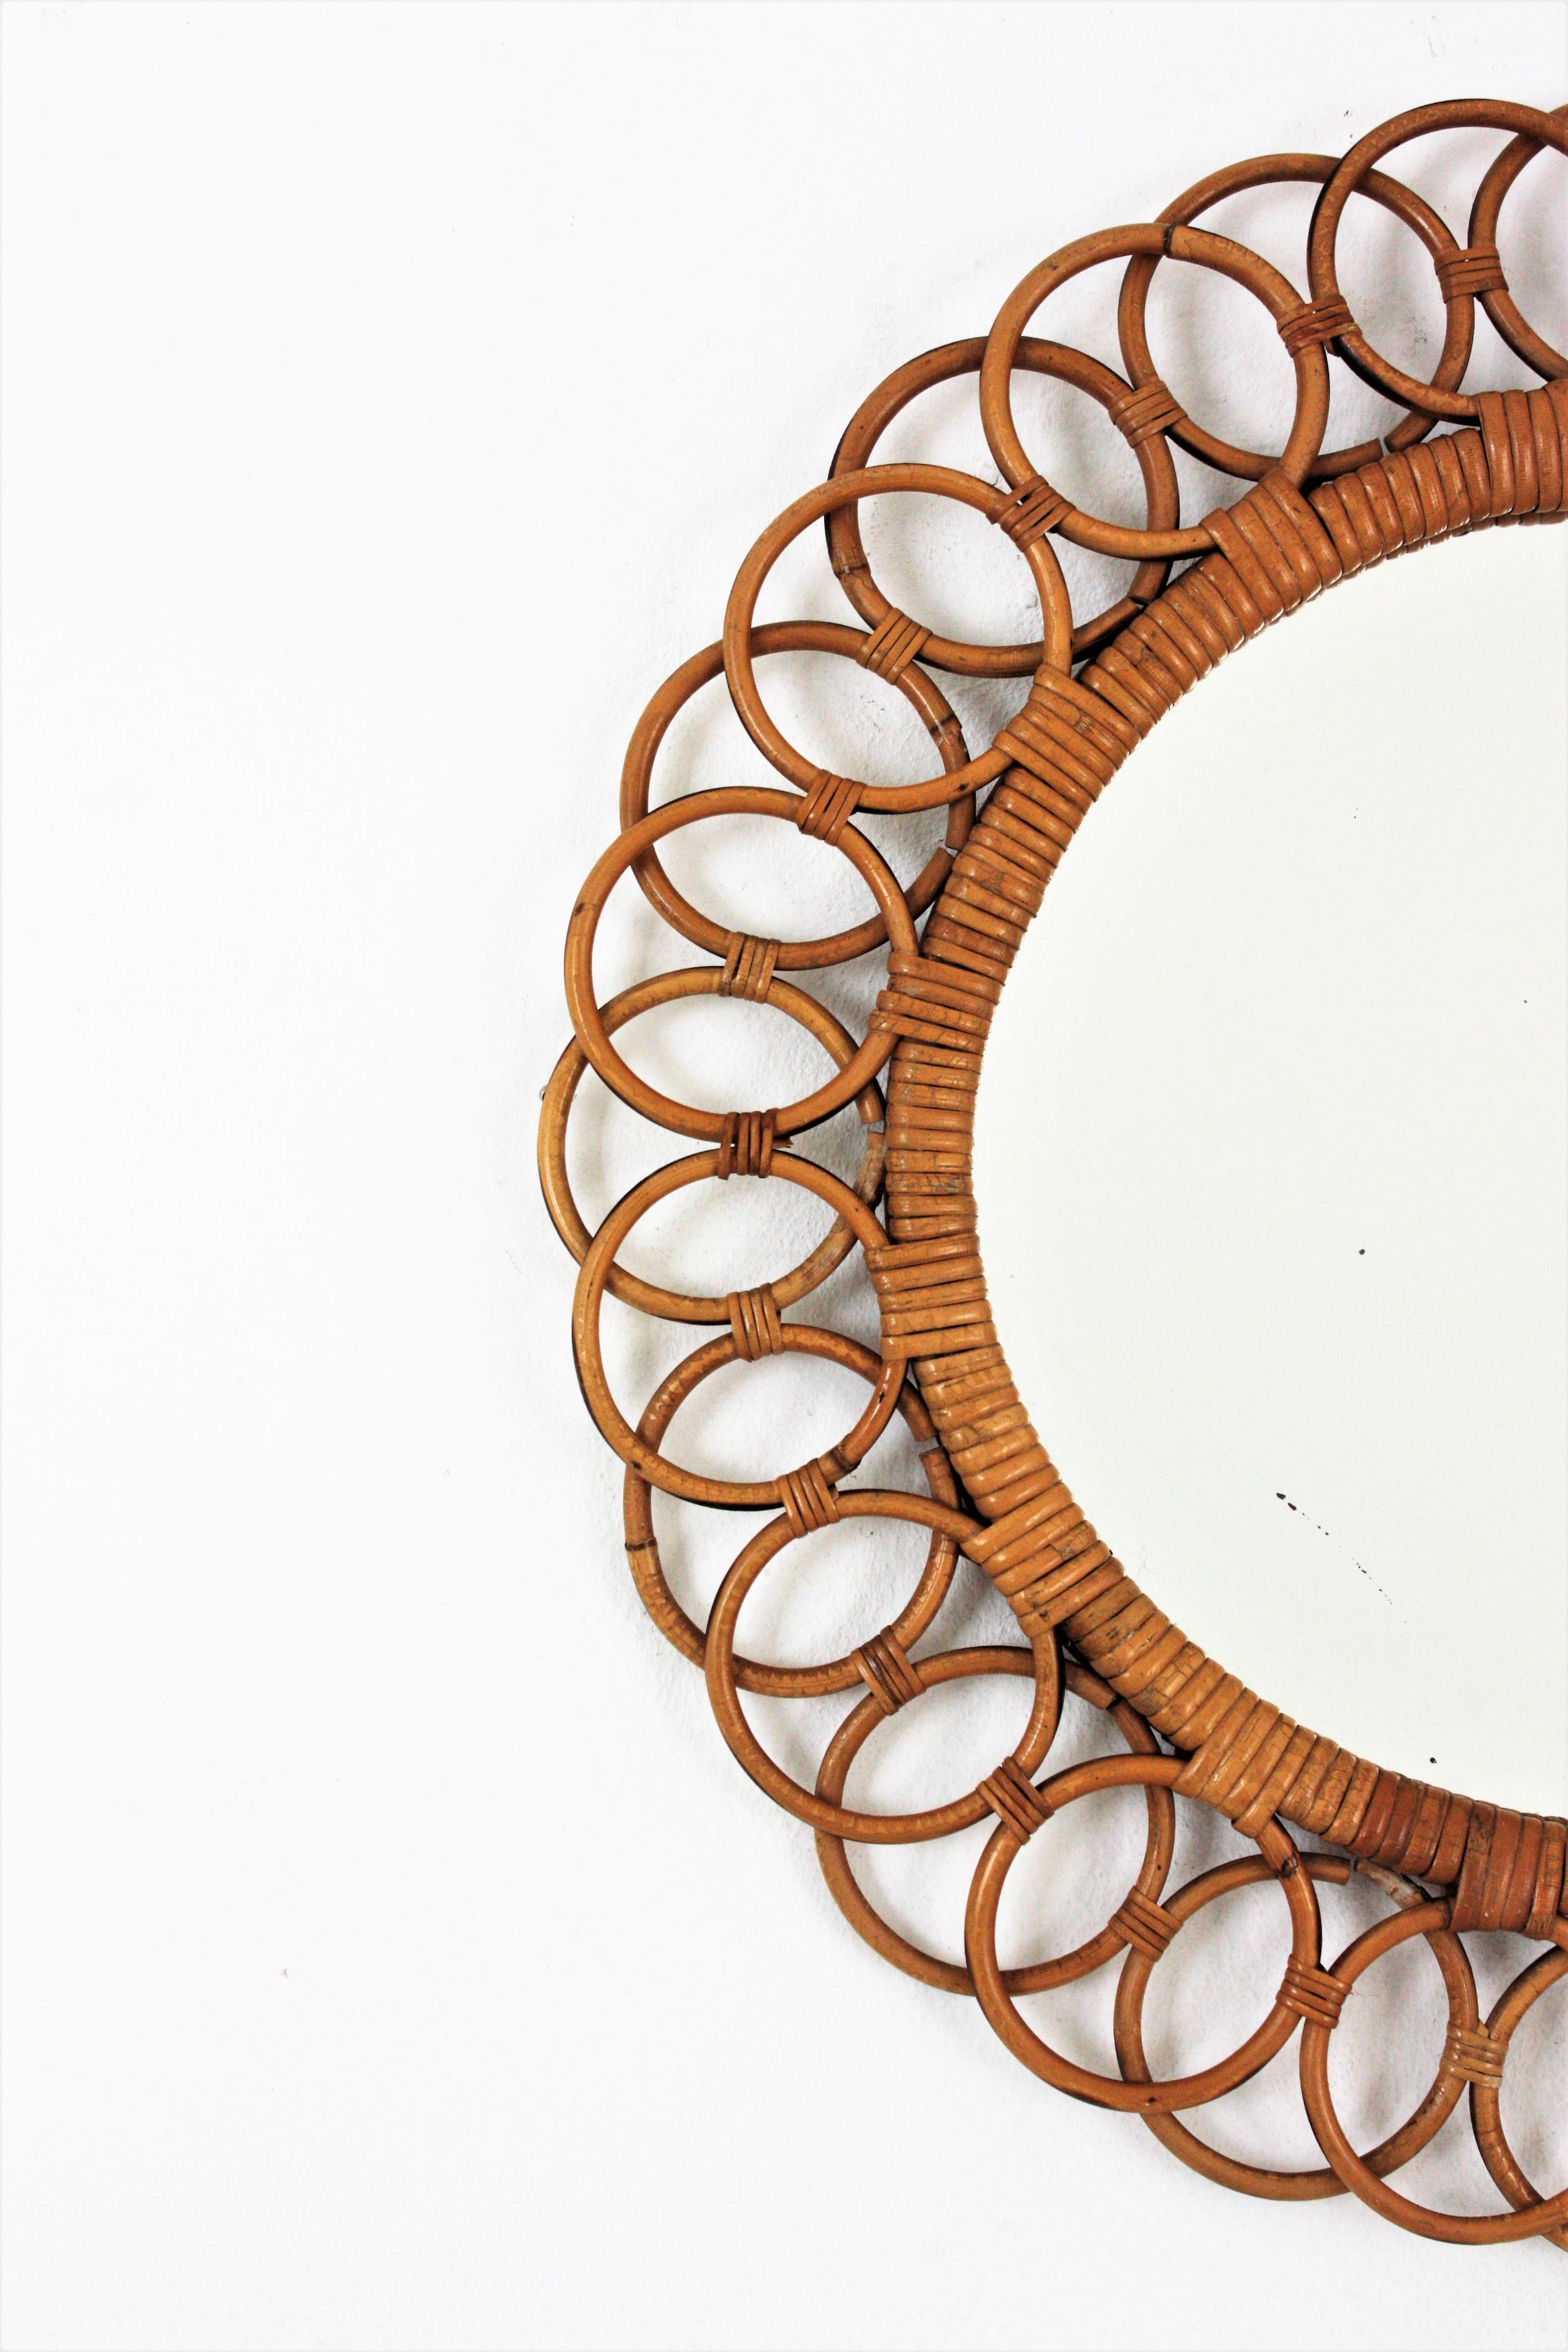 20th Century Spanish Rattan Round Mirror with Rings Frame For Sale